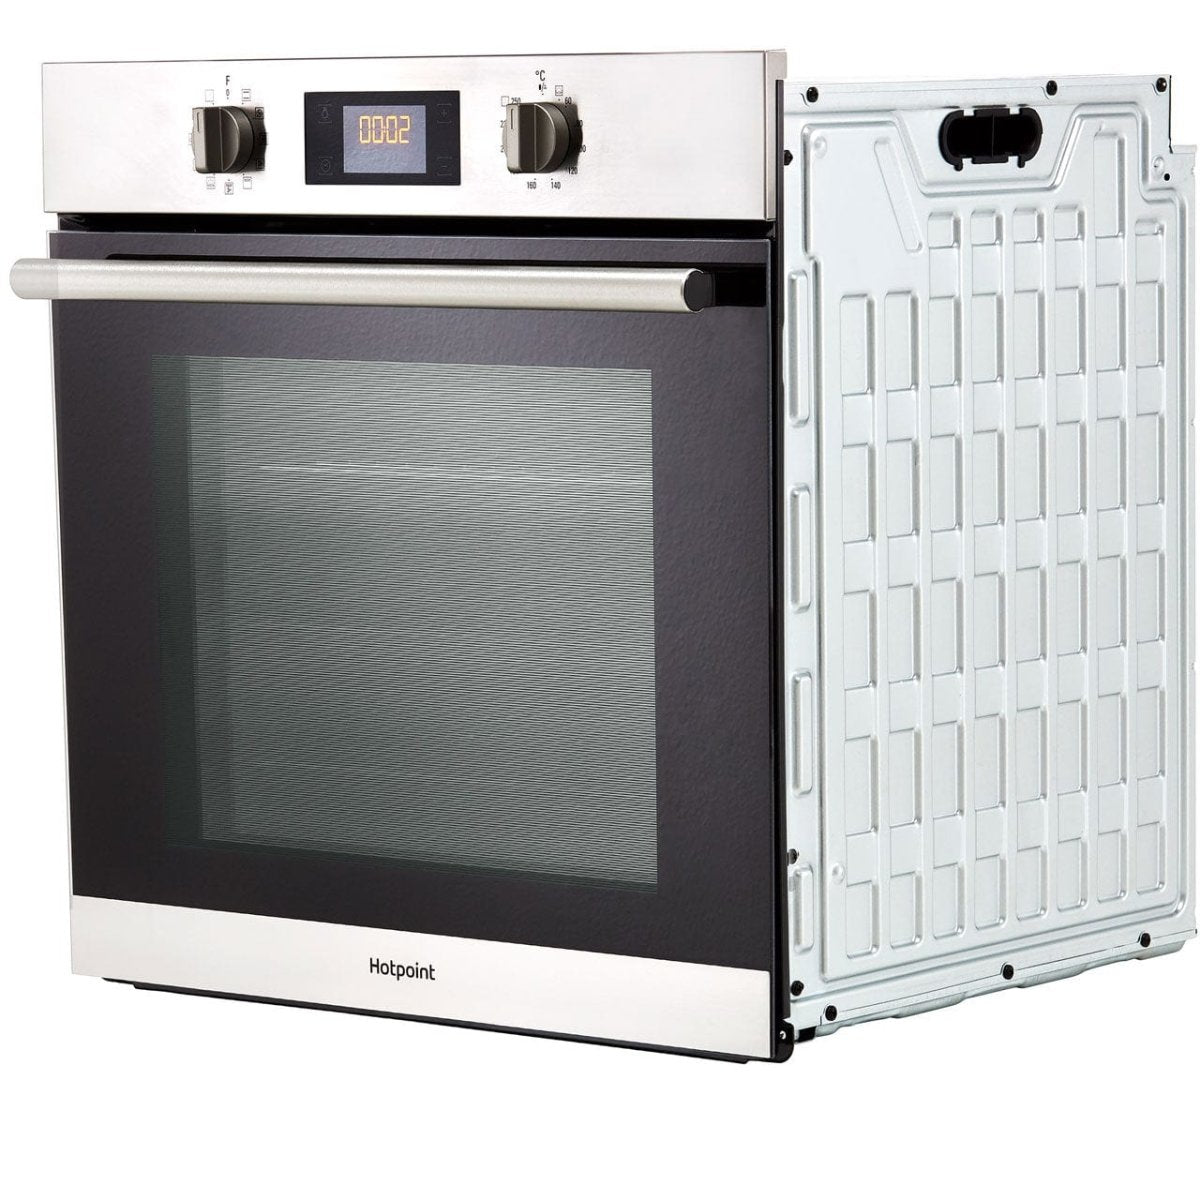 Hotpoint SA2840PIX Built In Electric Single Oven-Stainless Steel-A+ Rated - Atlantic Electrics